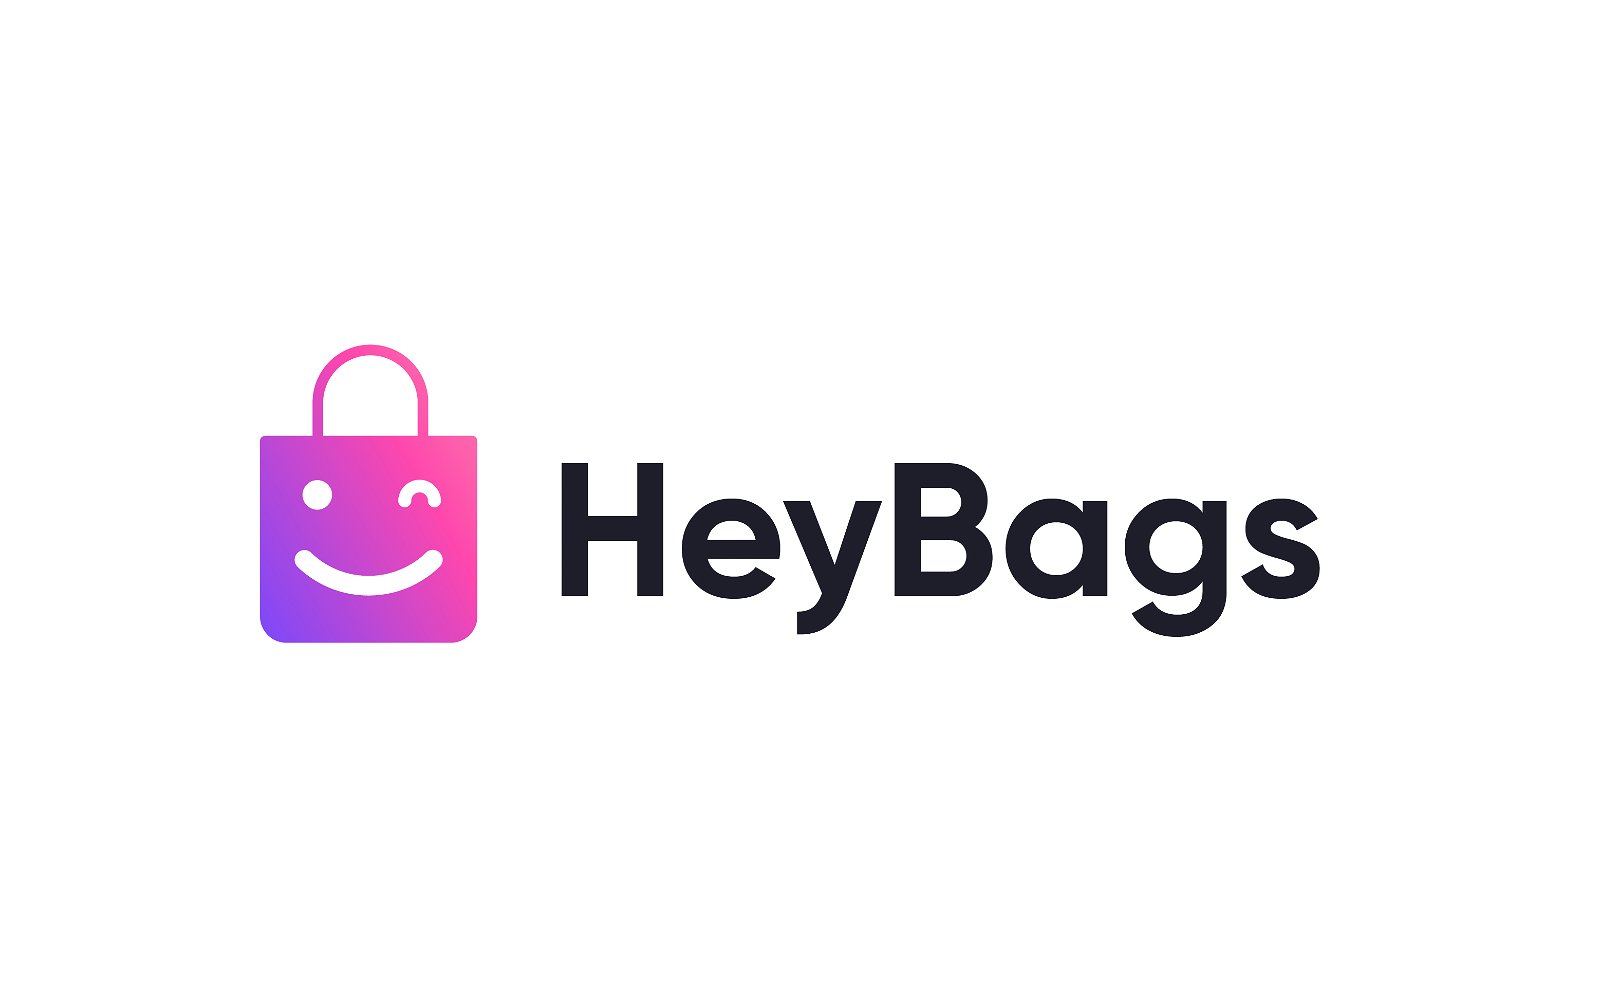 HeyBags.com - Creative brandable domain for sale